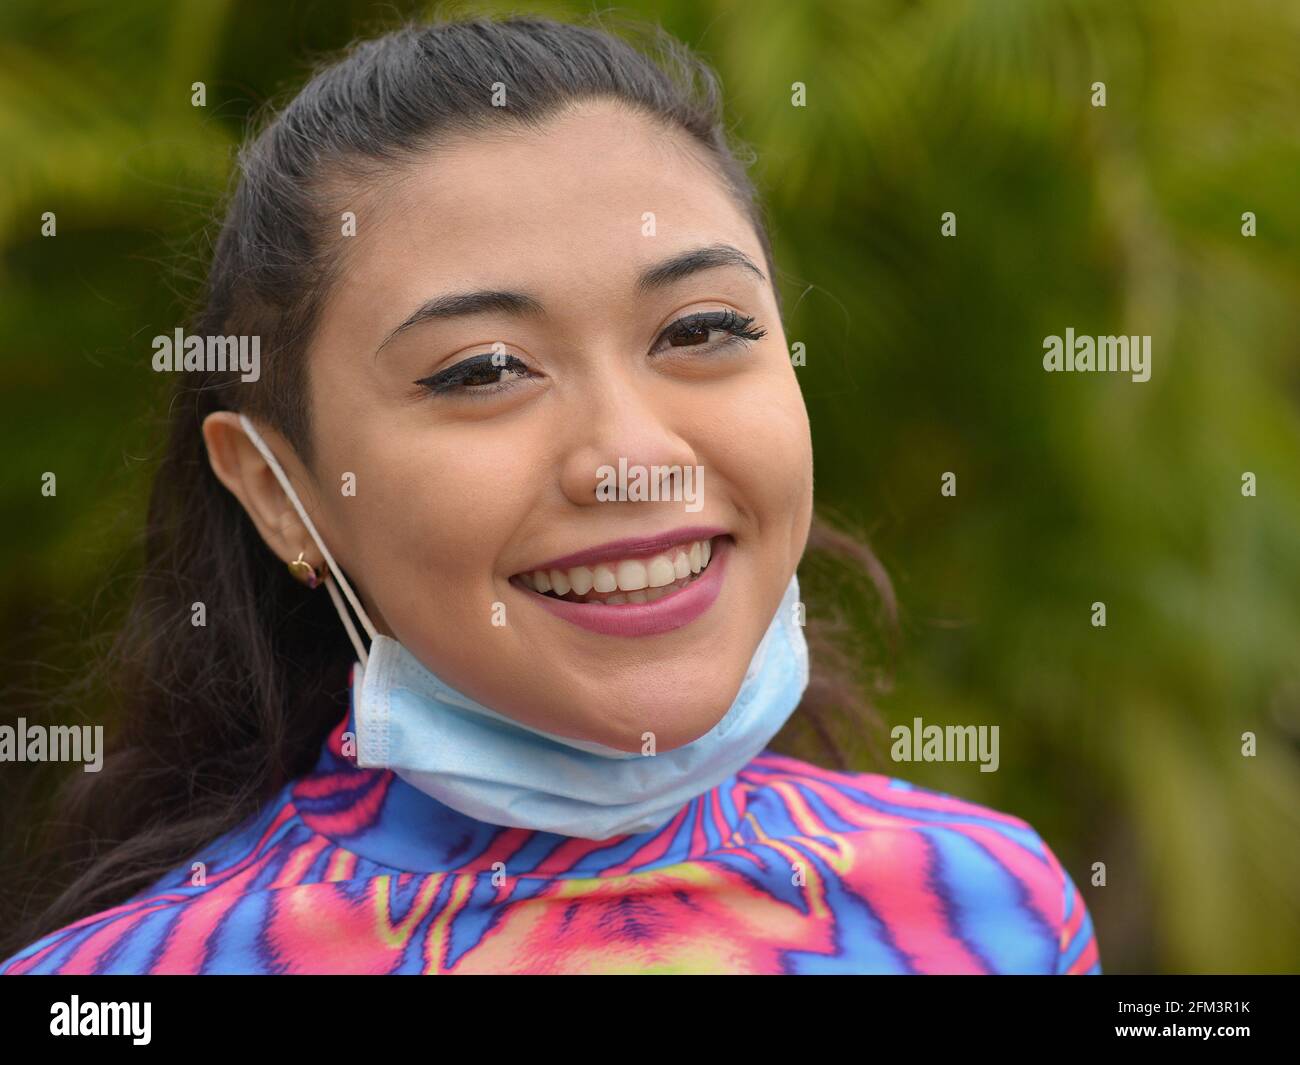 Young optimistic pretty Caucasian woman with eye makeup pulls down her light-blue surgical ear loop face mask and smiles for the camera. Stock Photo